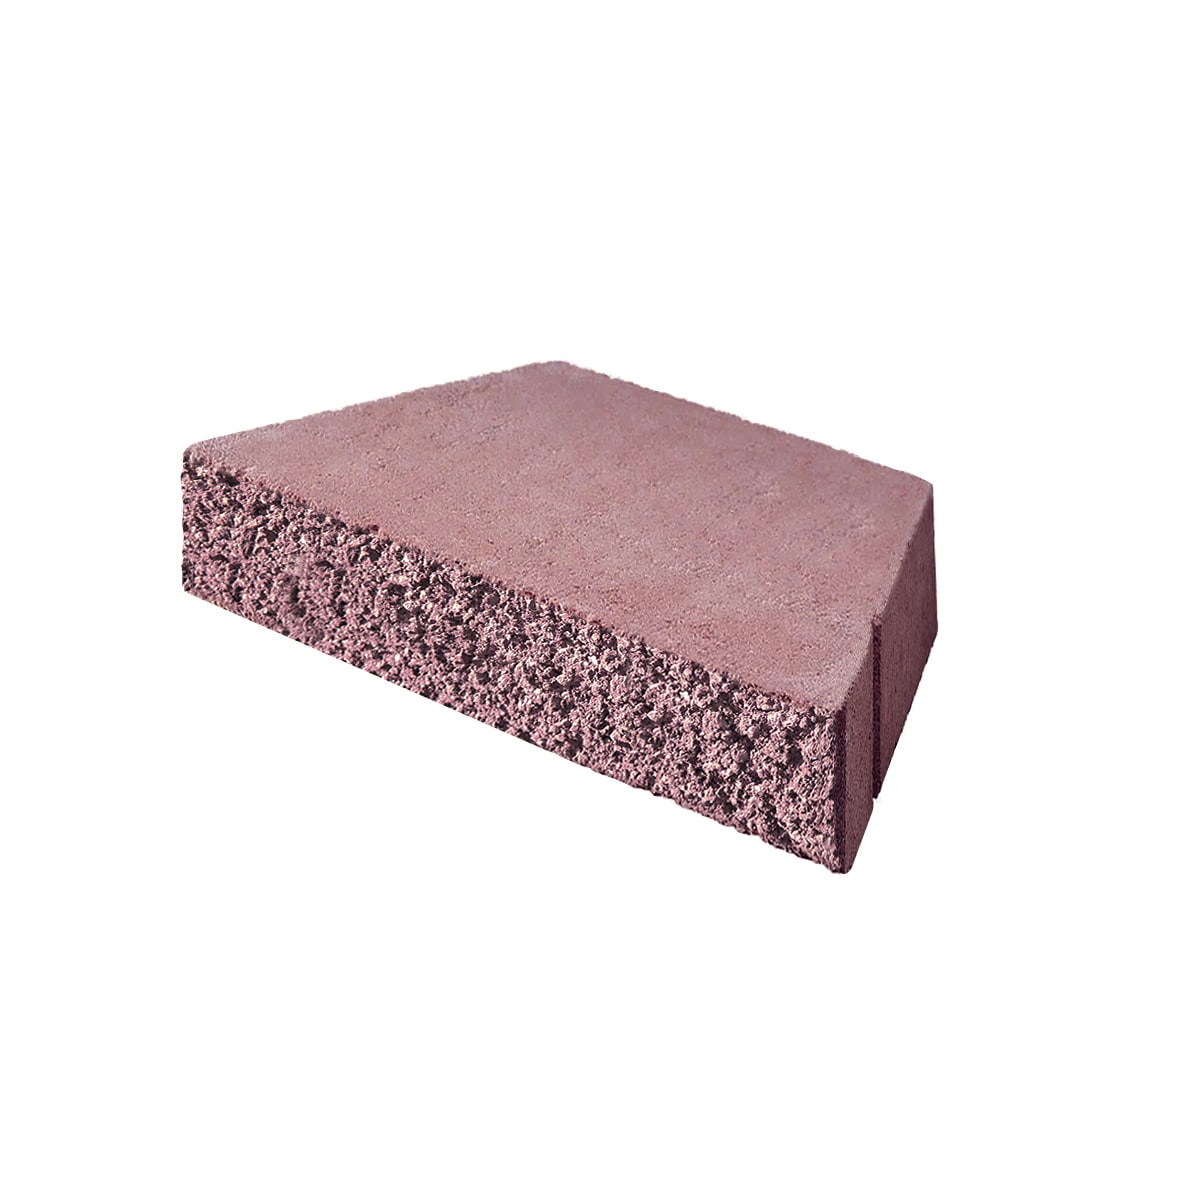 4-in H x 18-in L x 10.5-in D Rose Concrete Retaining Wall Cap in Red | - Keystone KEYUCR